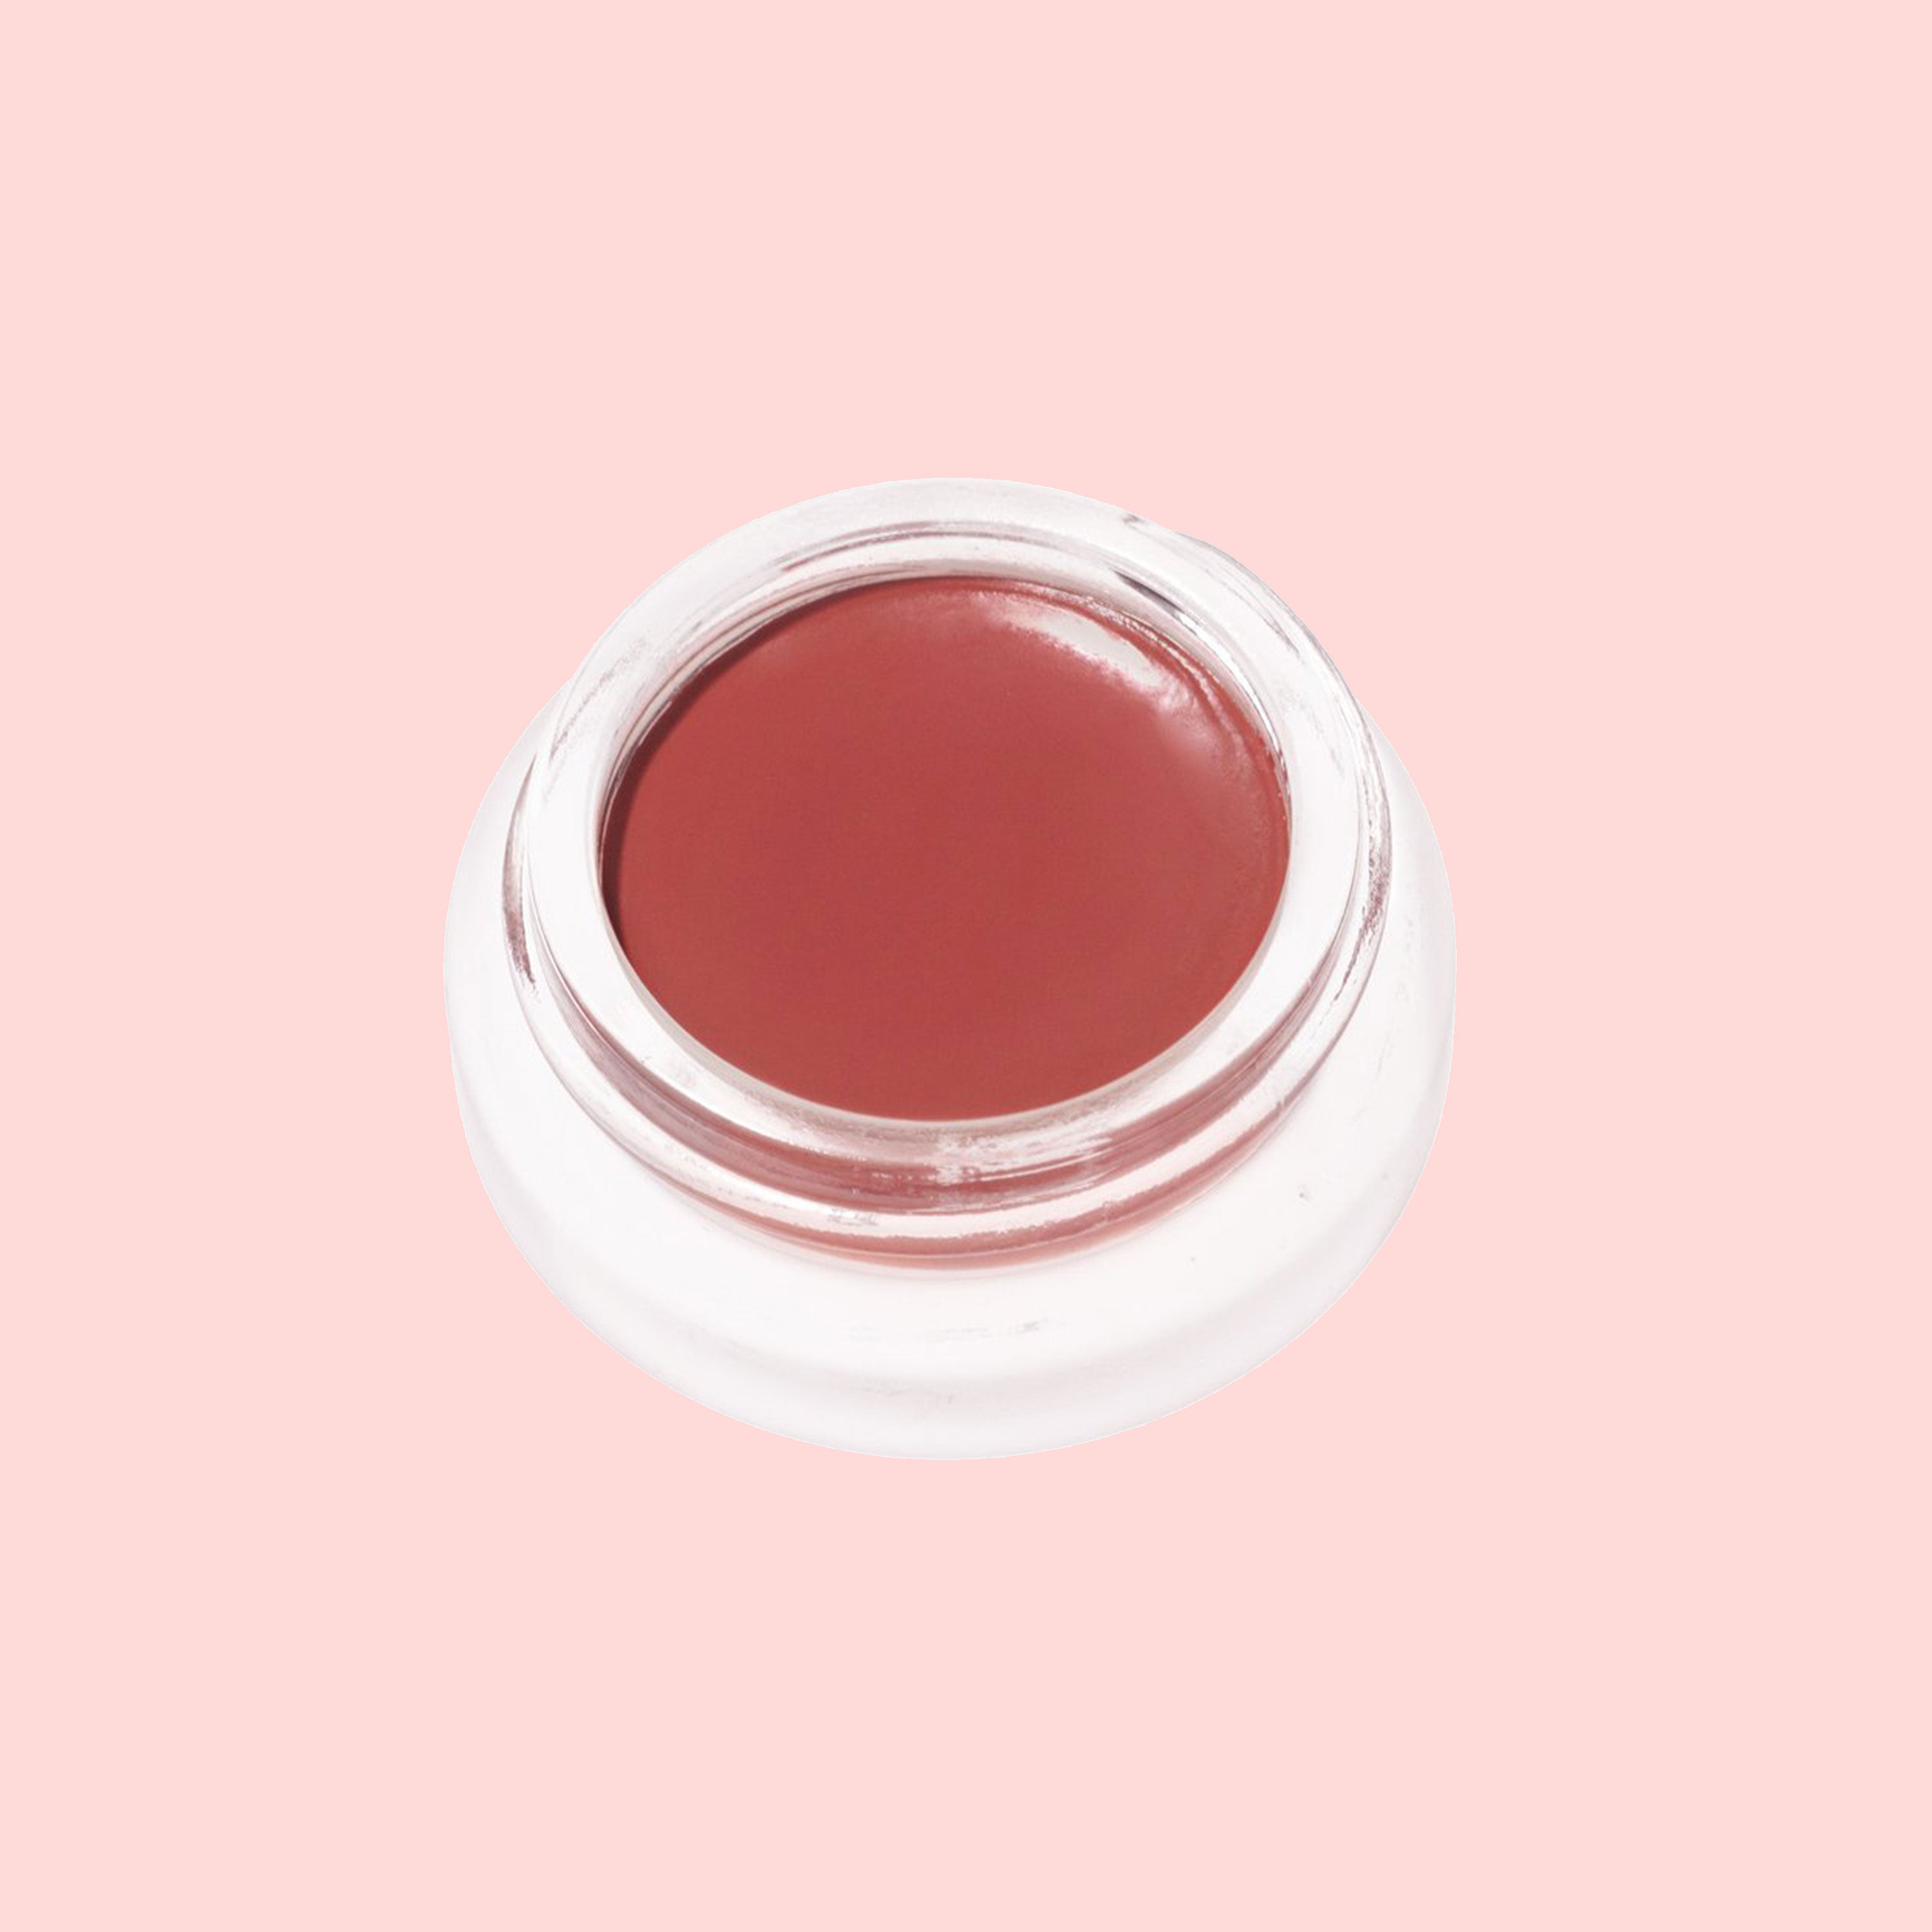 9 Gel And Cream Blushes That Actually Look Great On Deeper Skin Tones